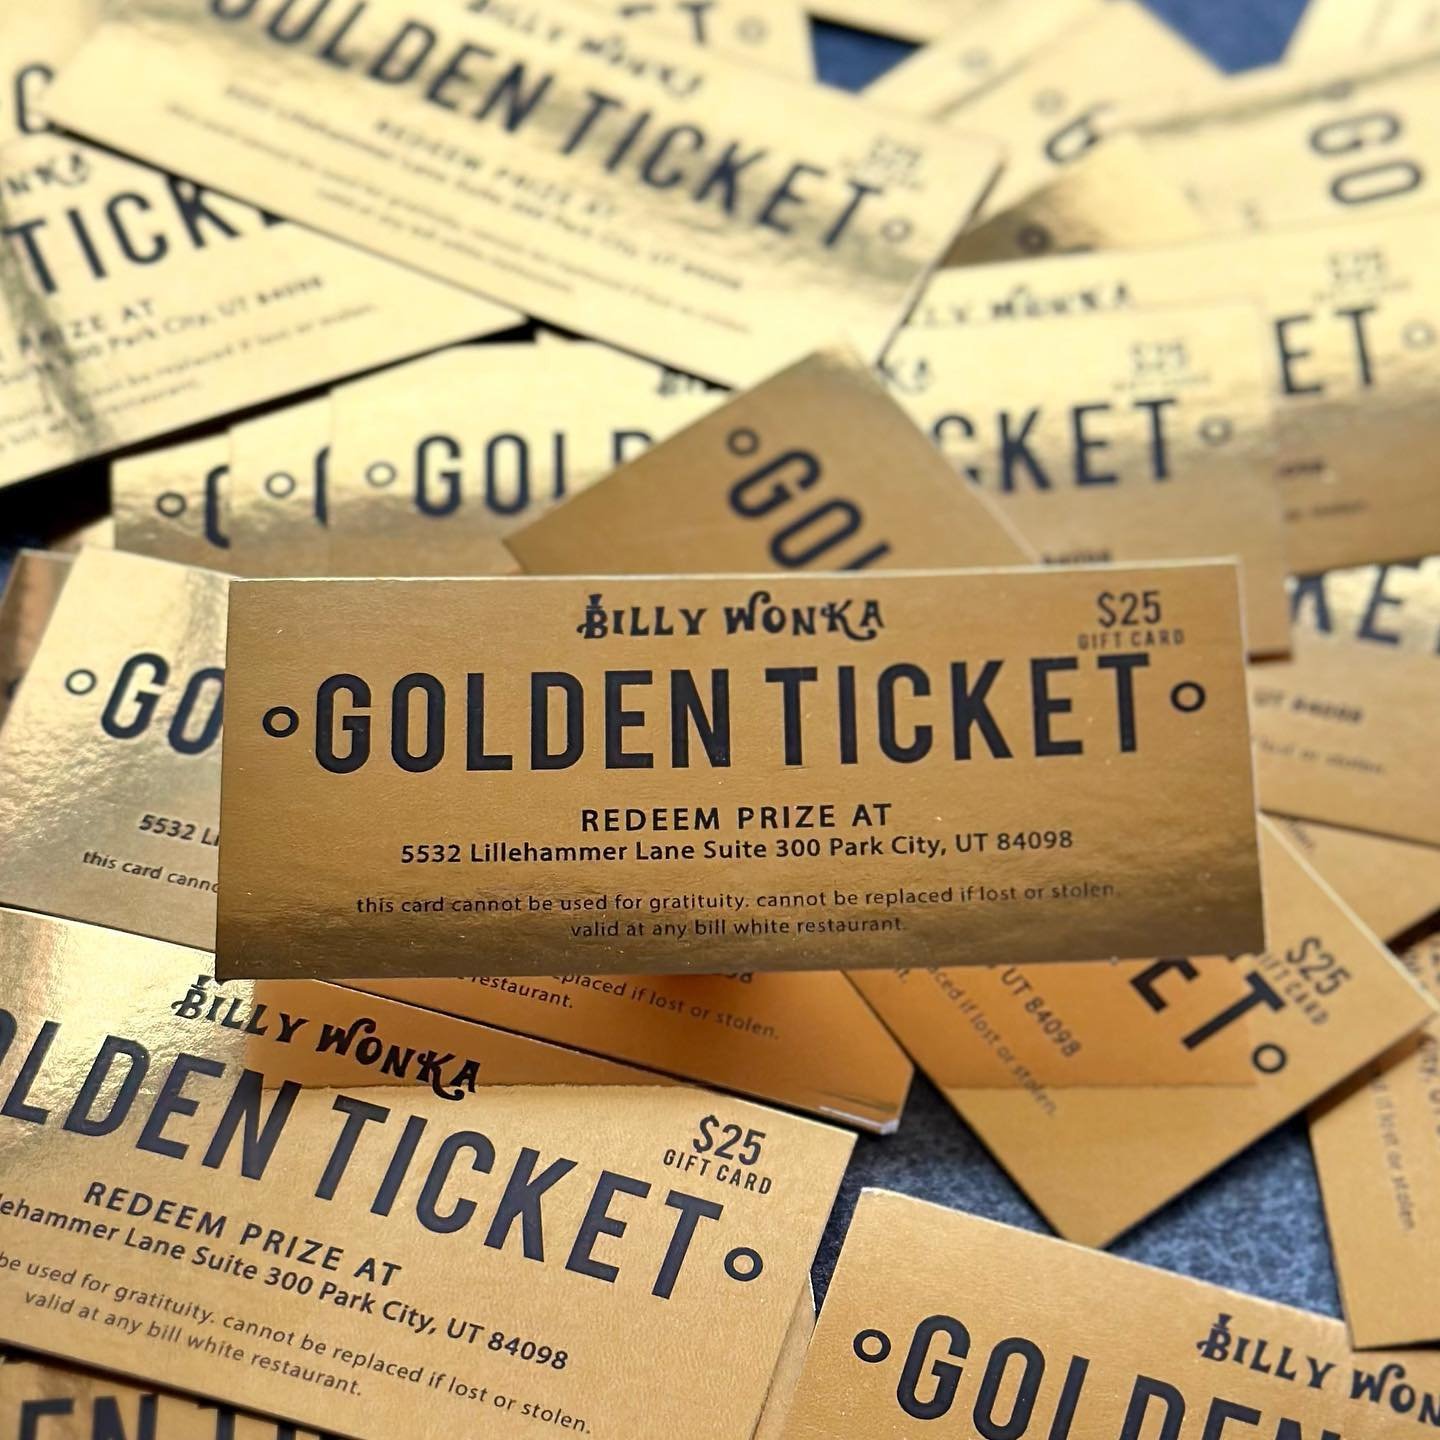 We will be passing out chocolate bars at Chimayo and Grappa from 3-5pm! 
We will have golden tickets hidden in 30 lucky chocolate bars. 
If found please redeem at address listed on ticket. Good luck!! 🍀✨